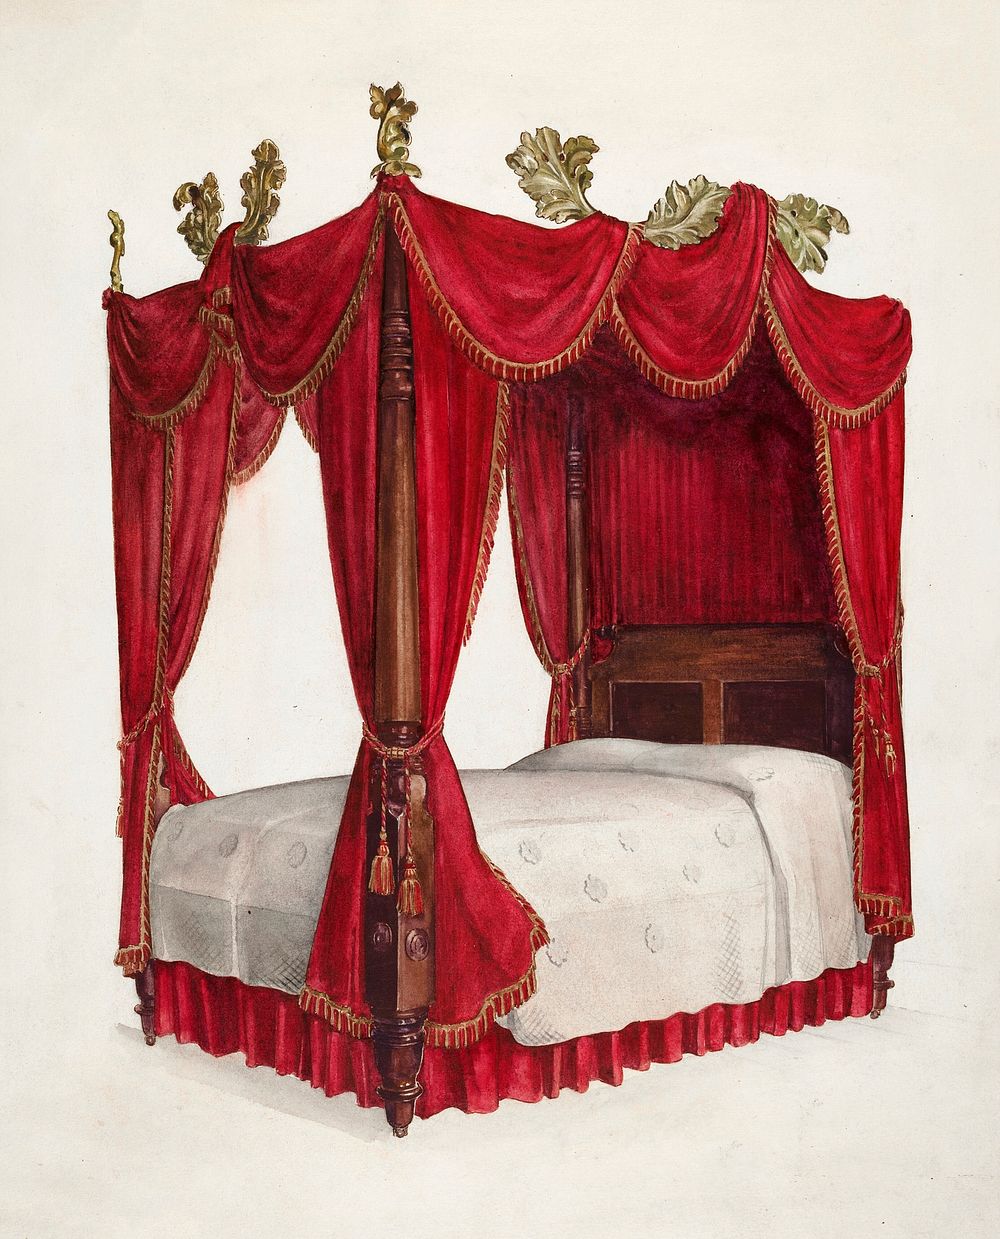 High Post Bed (1936) by Florence Choate. Original from The National Gallery of Art. Digitally enhanced by rawpixel.